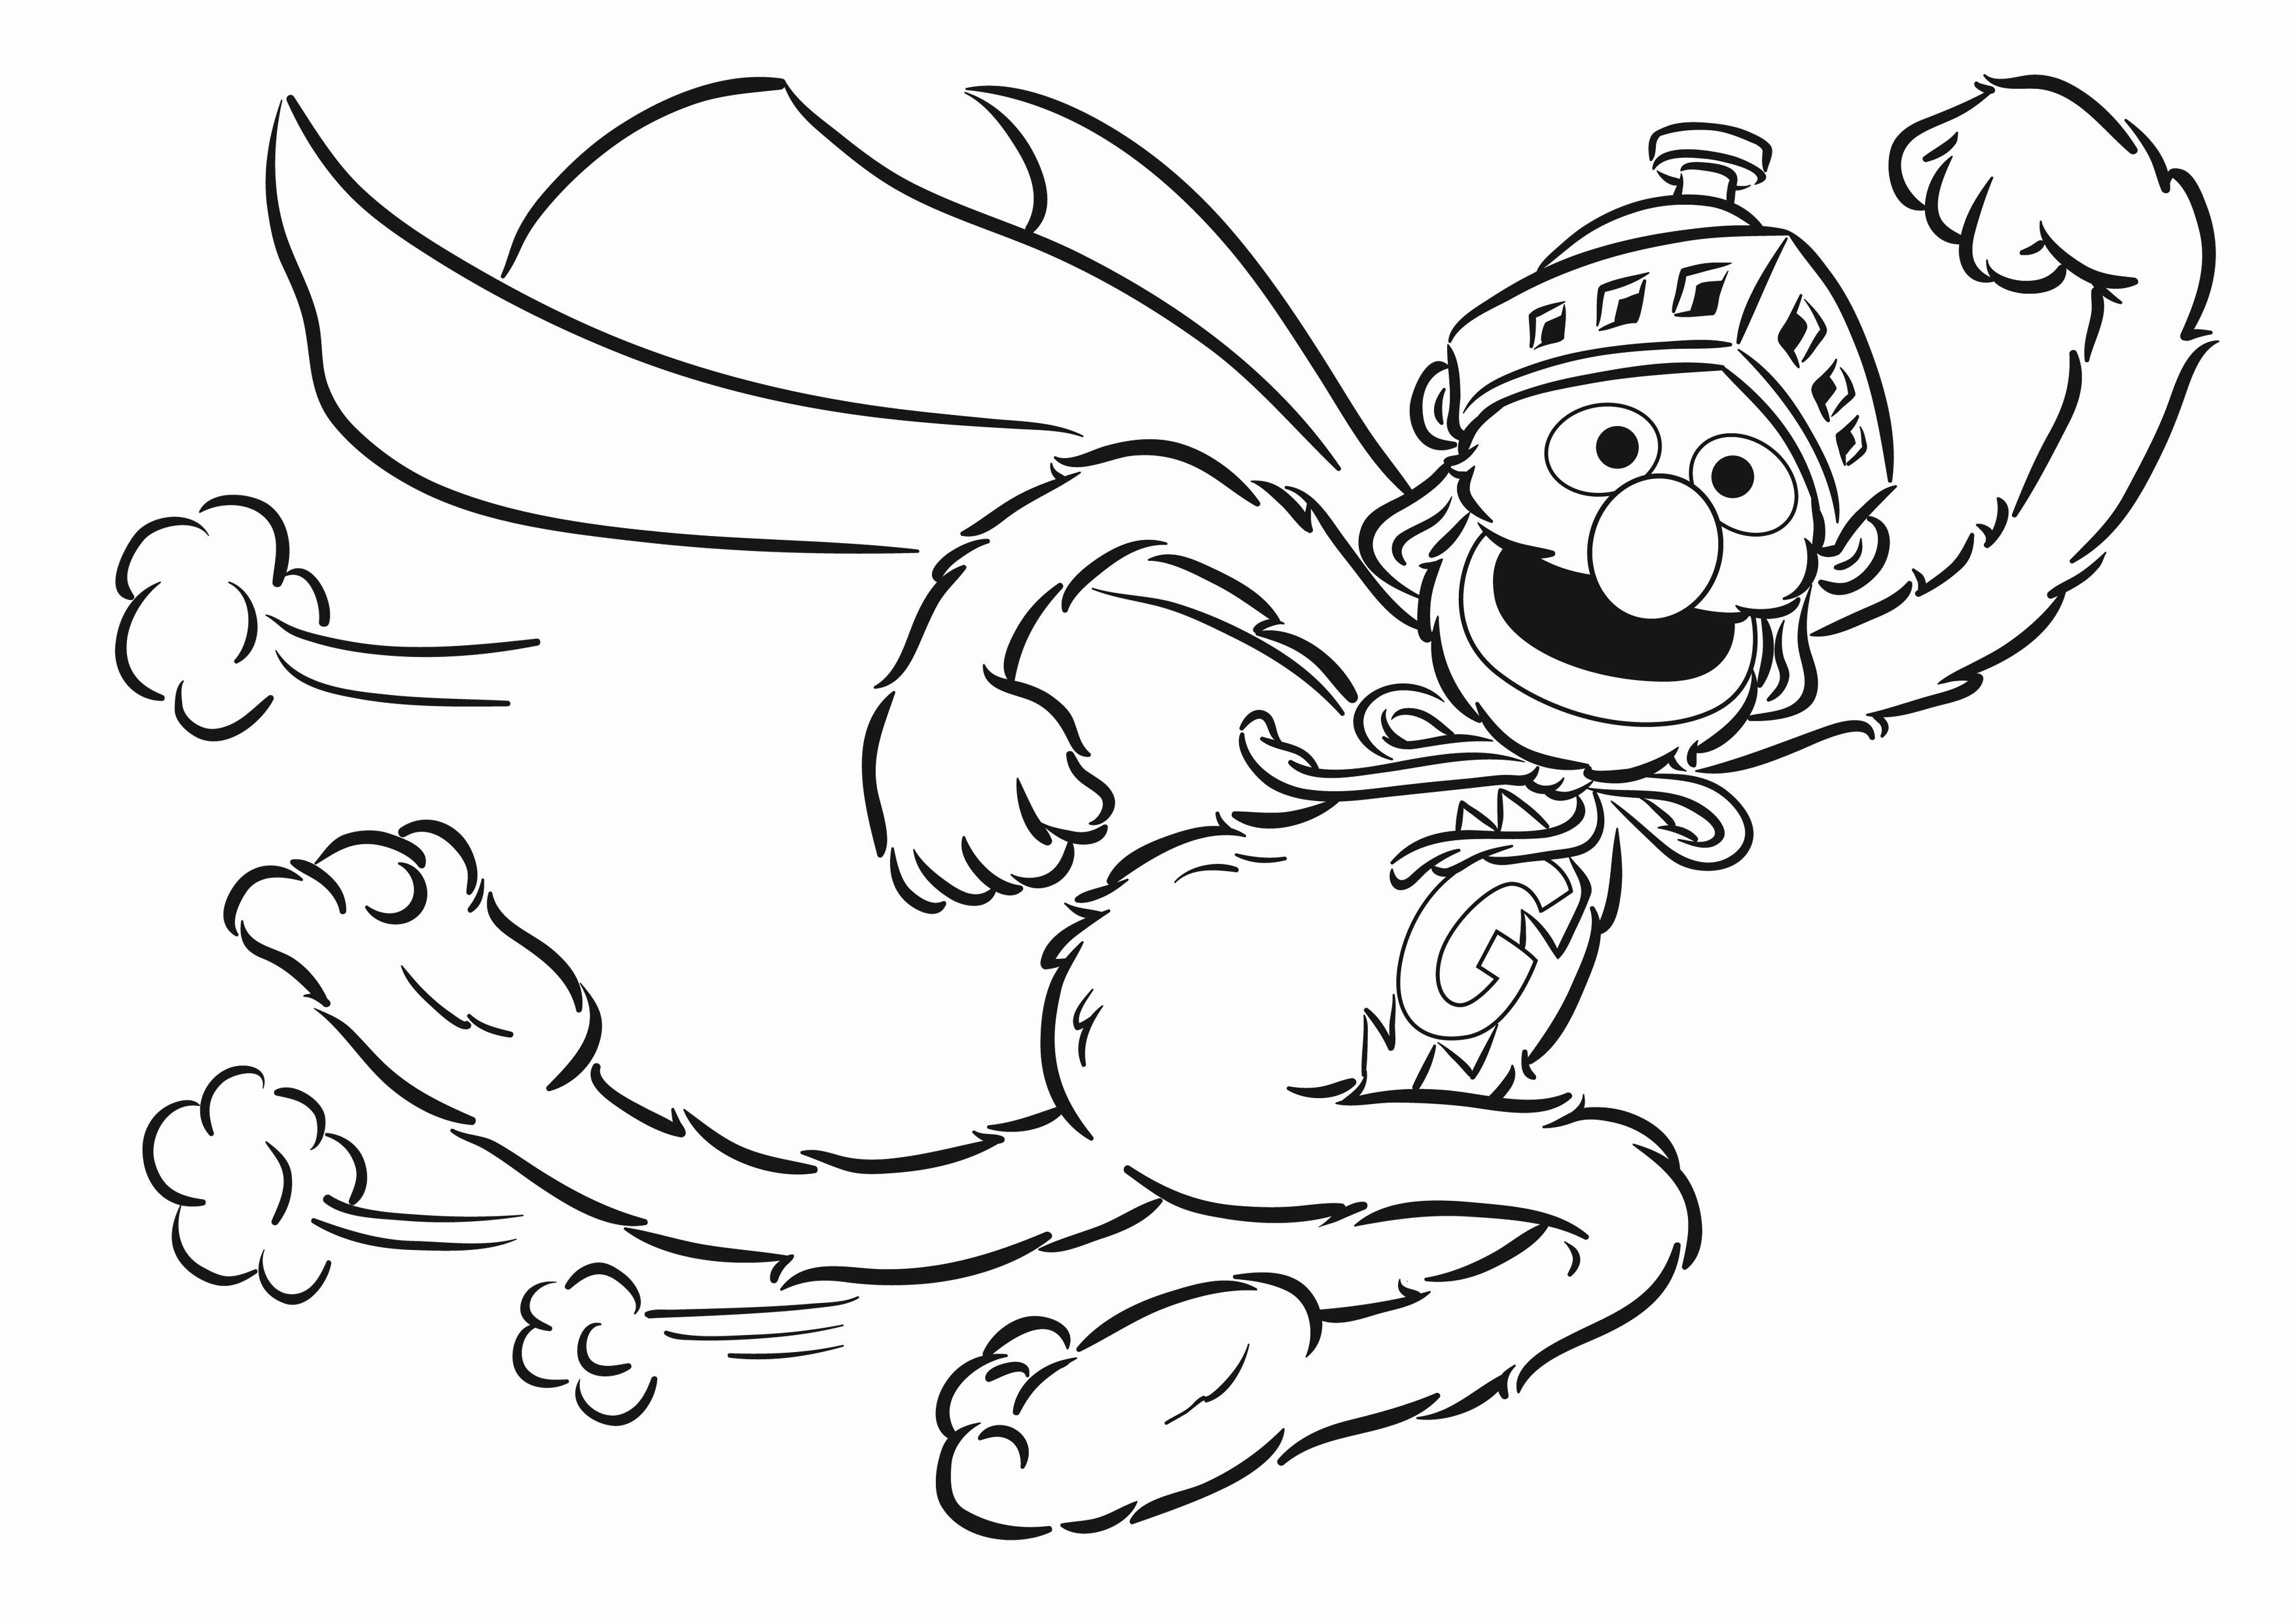 Super Grover Coloring Page